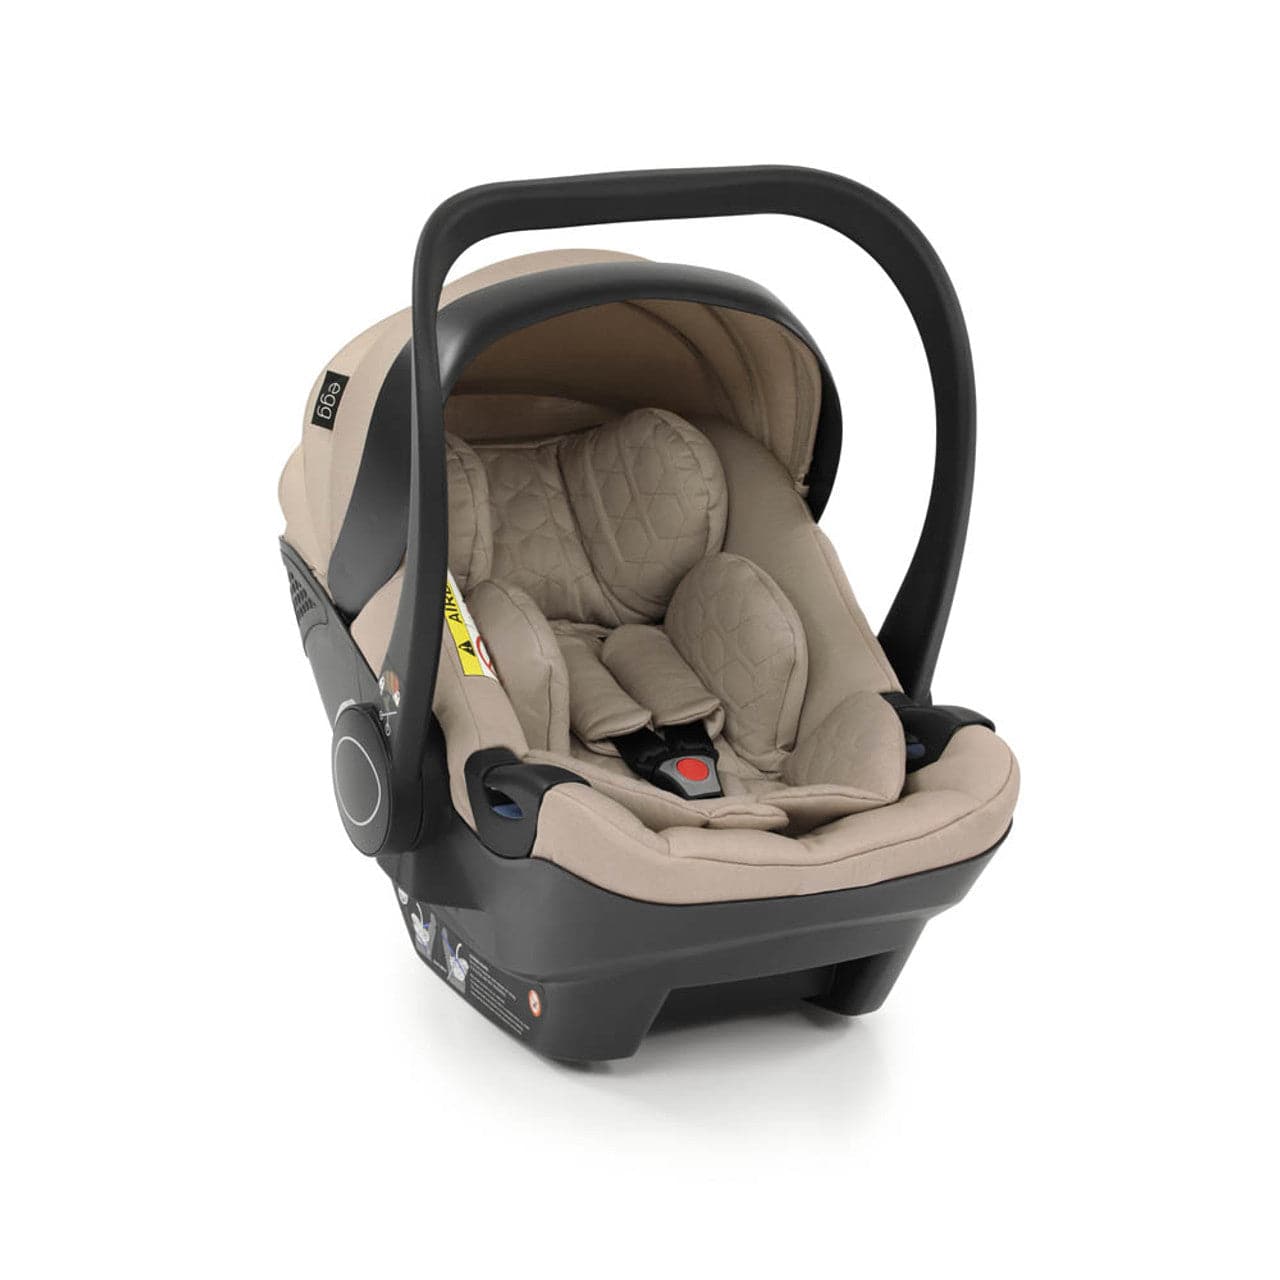 Egg Shell I-Size Newborn Car Seat - Feather - For Your Little One